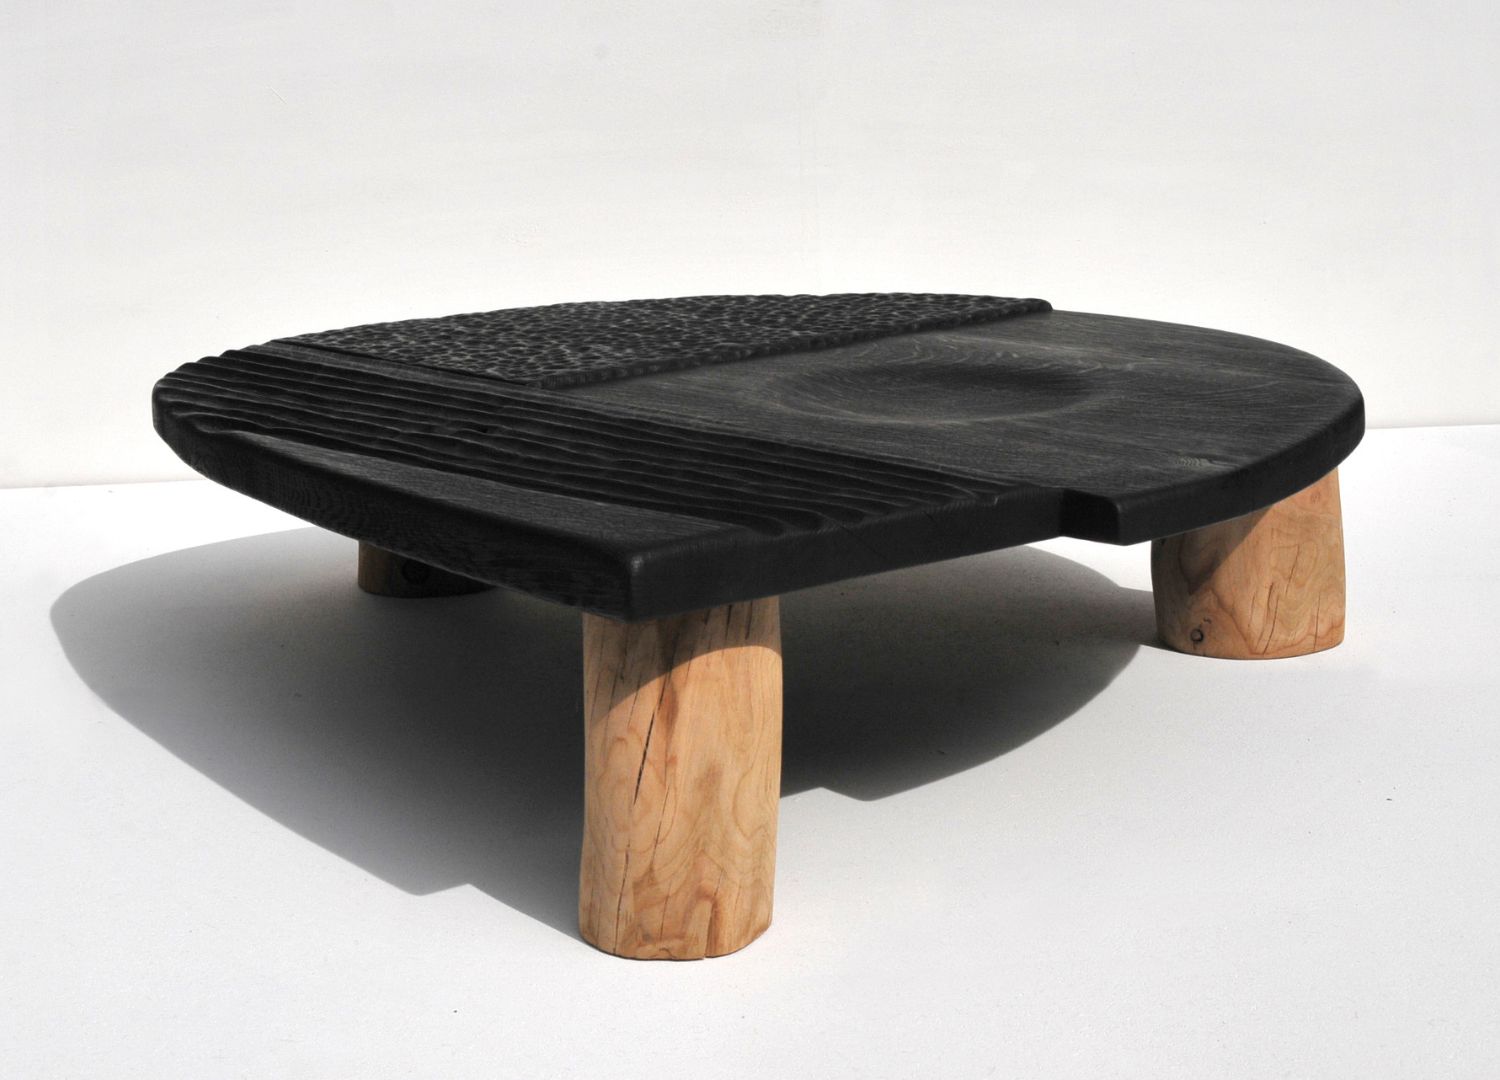 StudioF - Low Coffee Table by Victor Hahner _ Lake Como Design Festival - Theme: neo-nomadism